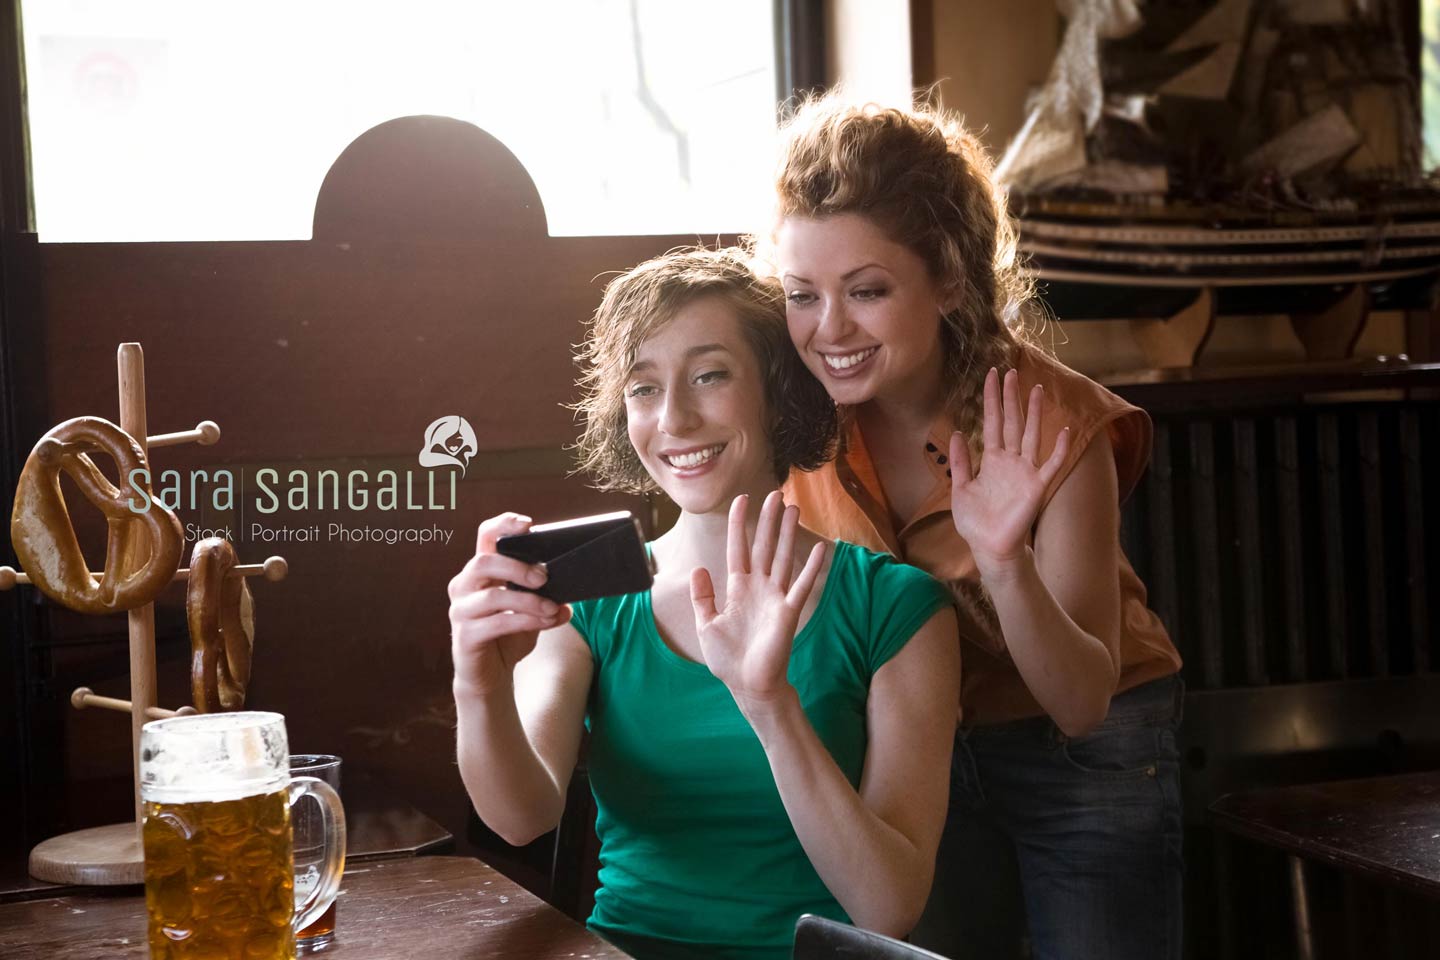 Two girlfriend waving at their smartphone